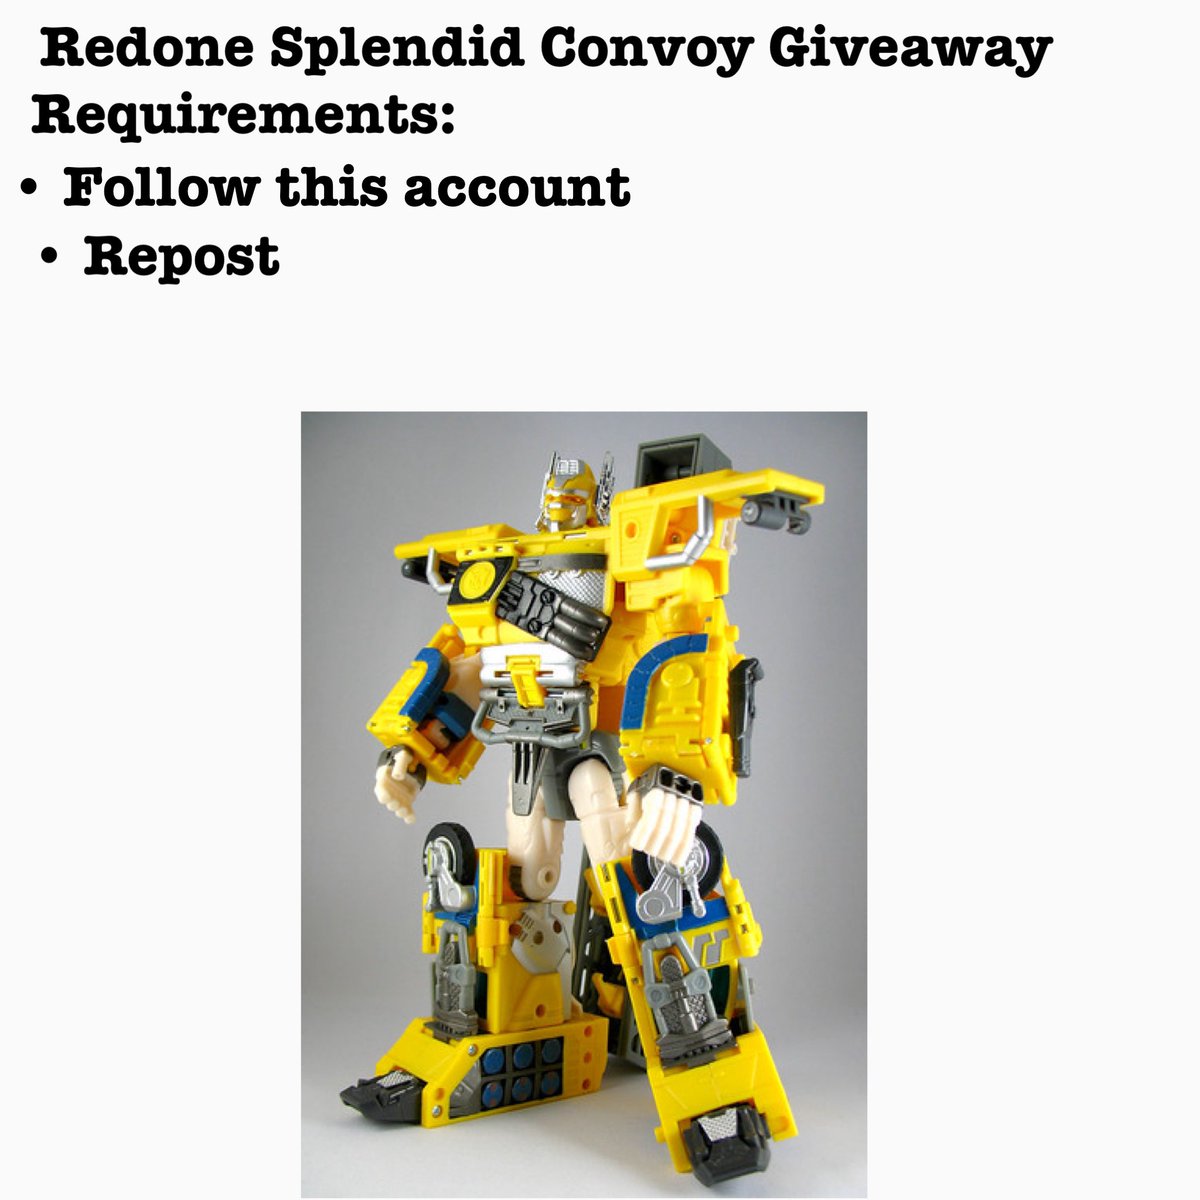 The winner of Splendid Convoy refused delivery, so it was returned back to me. Now this is a start over of the Splendid Convoy giveaway. All you need do is follow and repost. This will end most likely Monday or Tuesday since I want to ship this out quick.